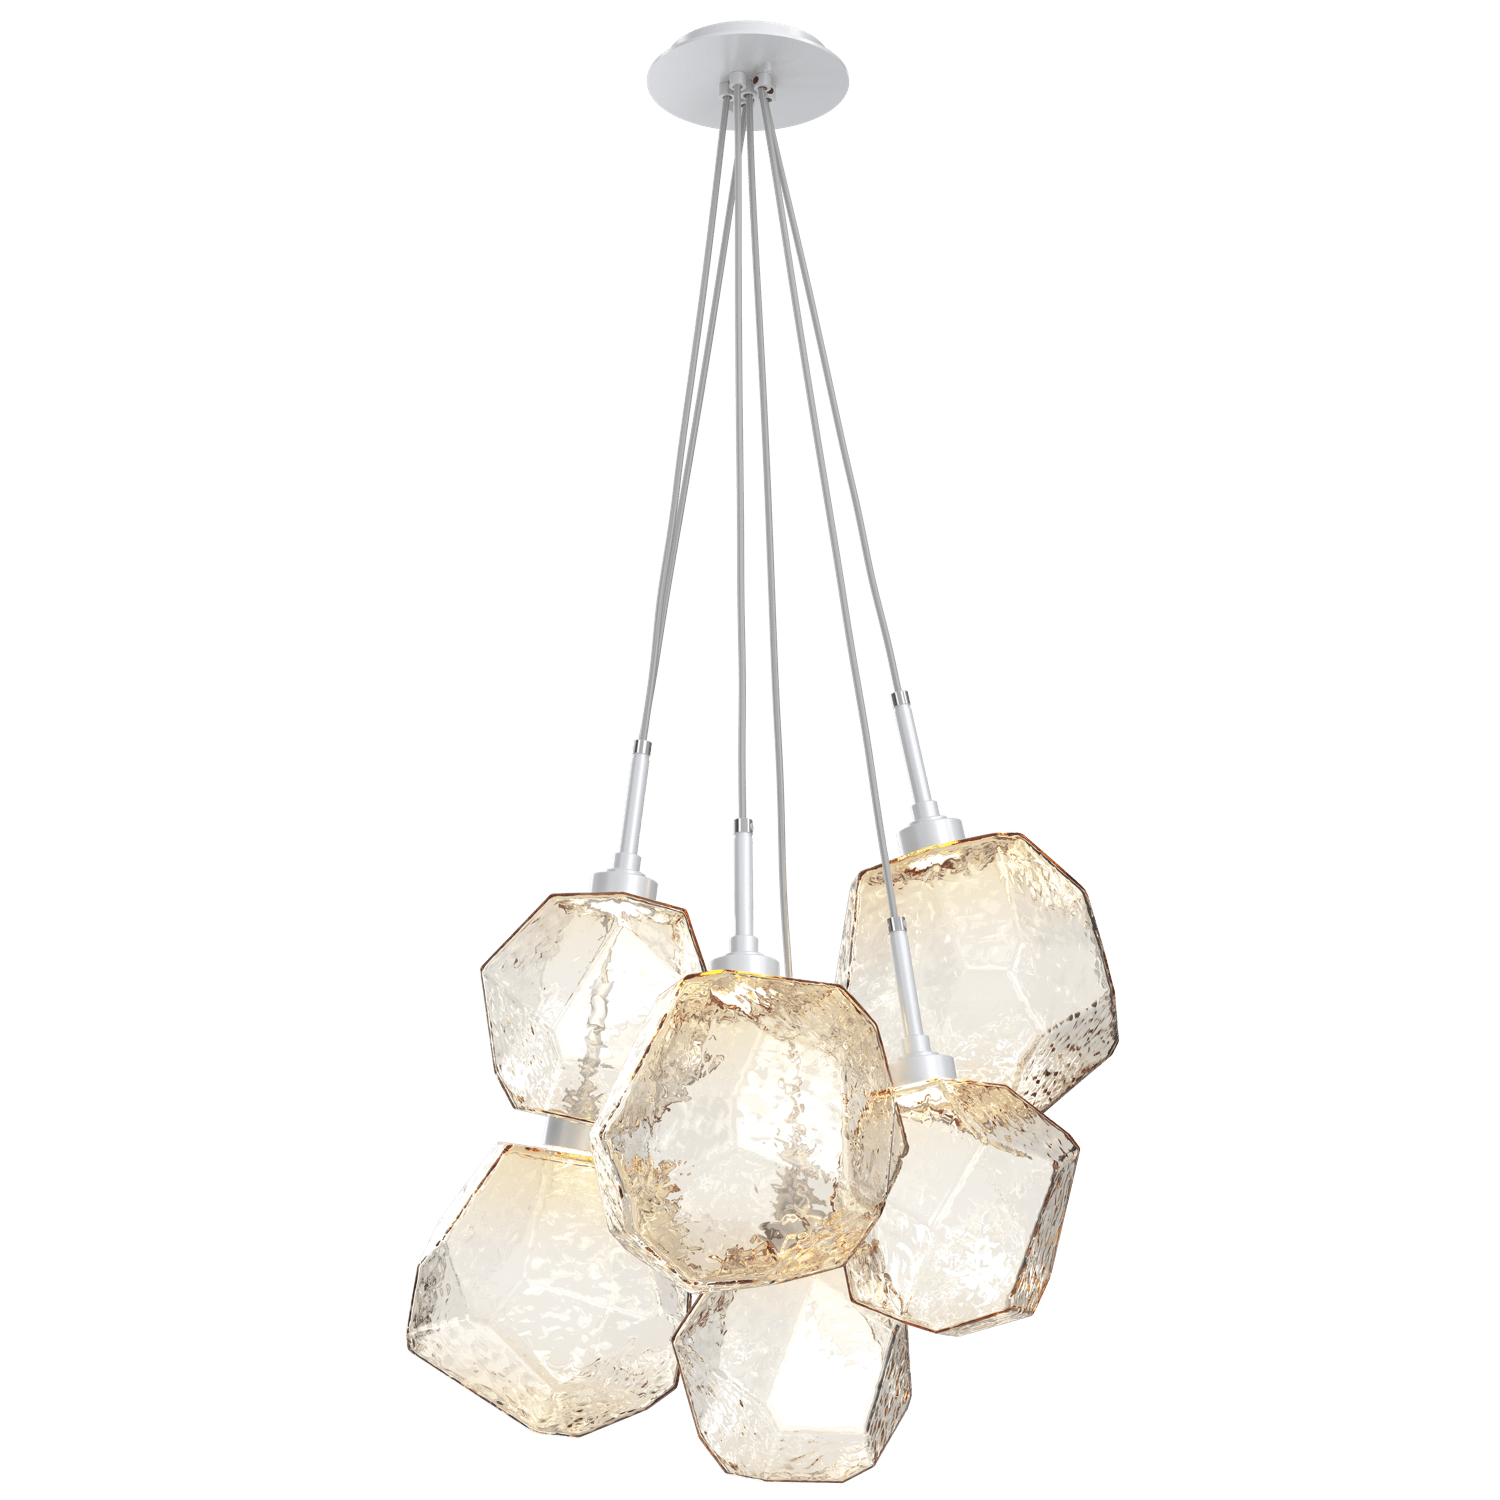 CHB0039-0F-CS-A-Hammerton-Studio-Gem-6-light-cluster-pendant-light-with-classic-silver-finish-and-amber-blown-glass-shades-and-LED-lamping